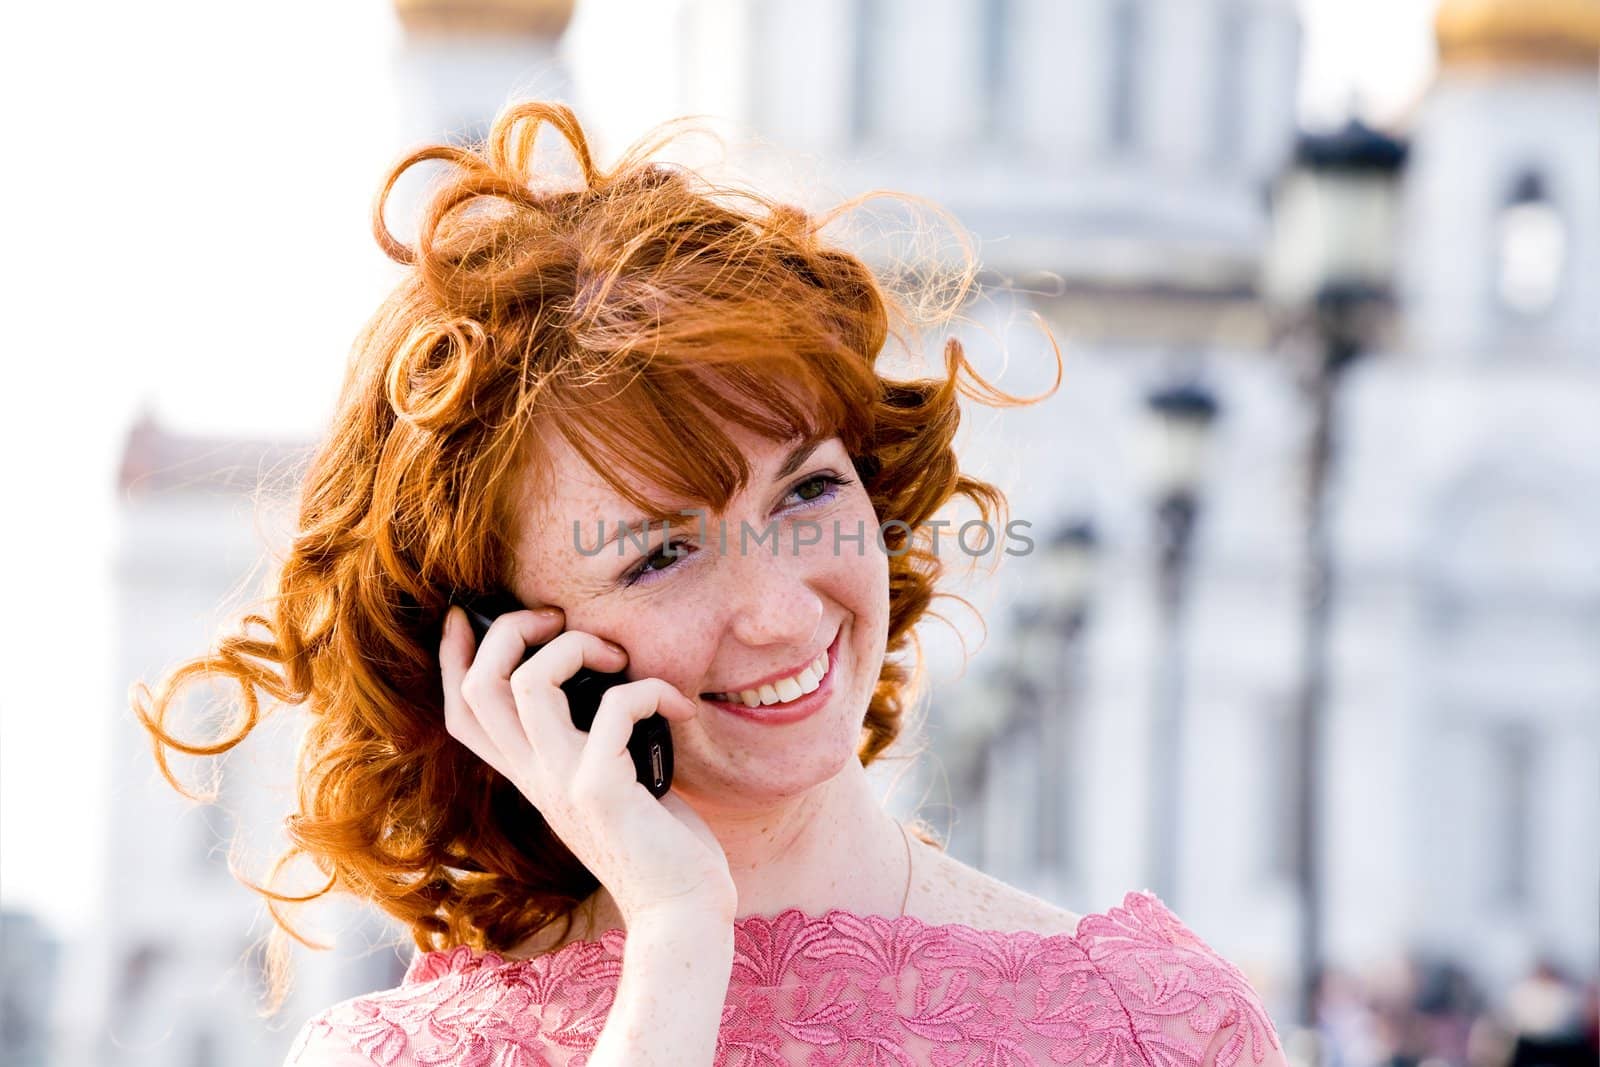 Smiling red-haired young woman talking on mobile phone outdoors